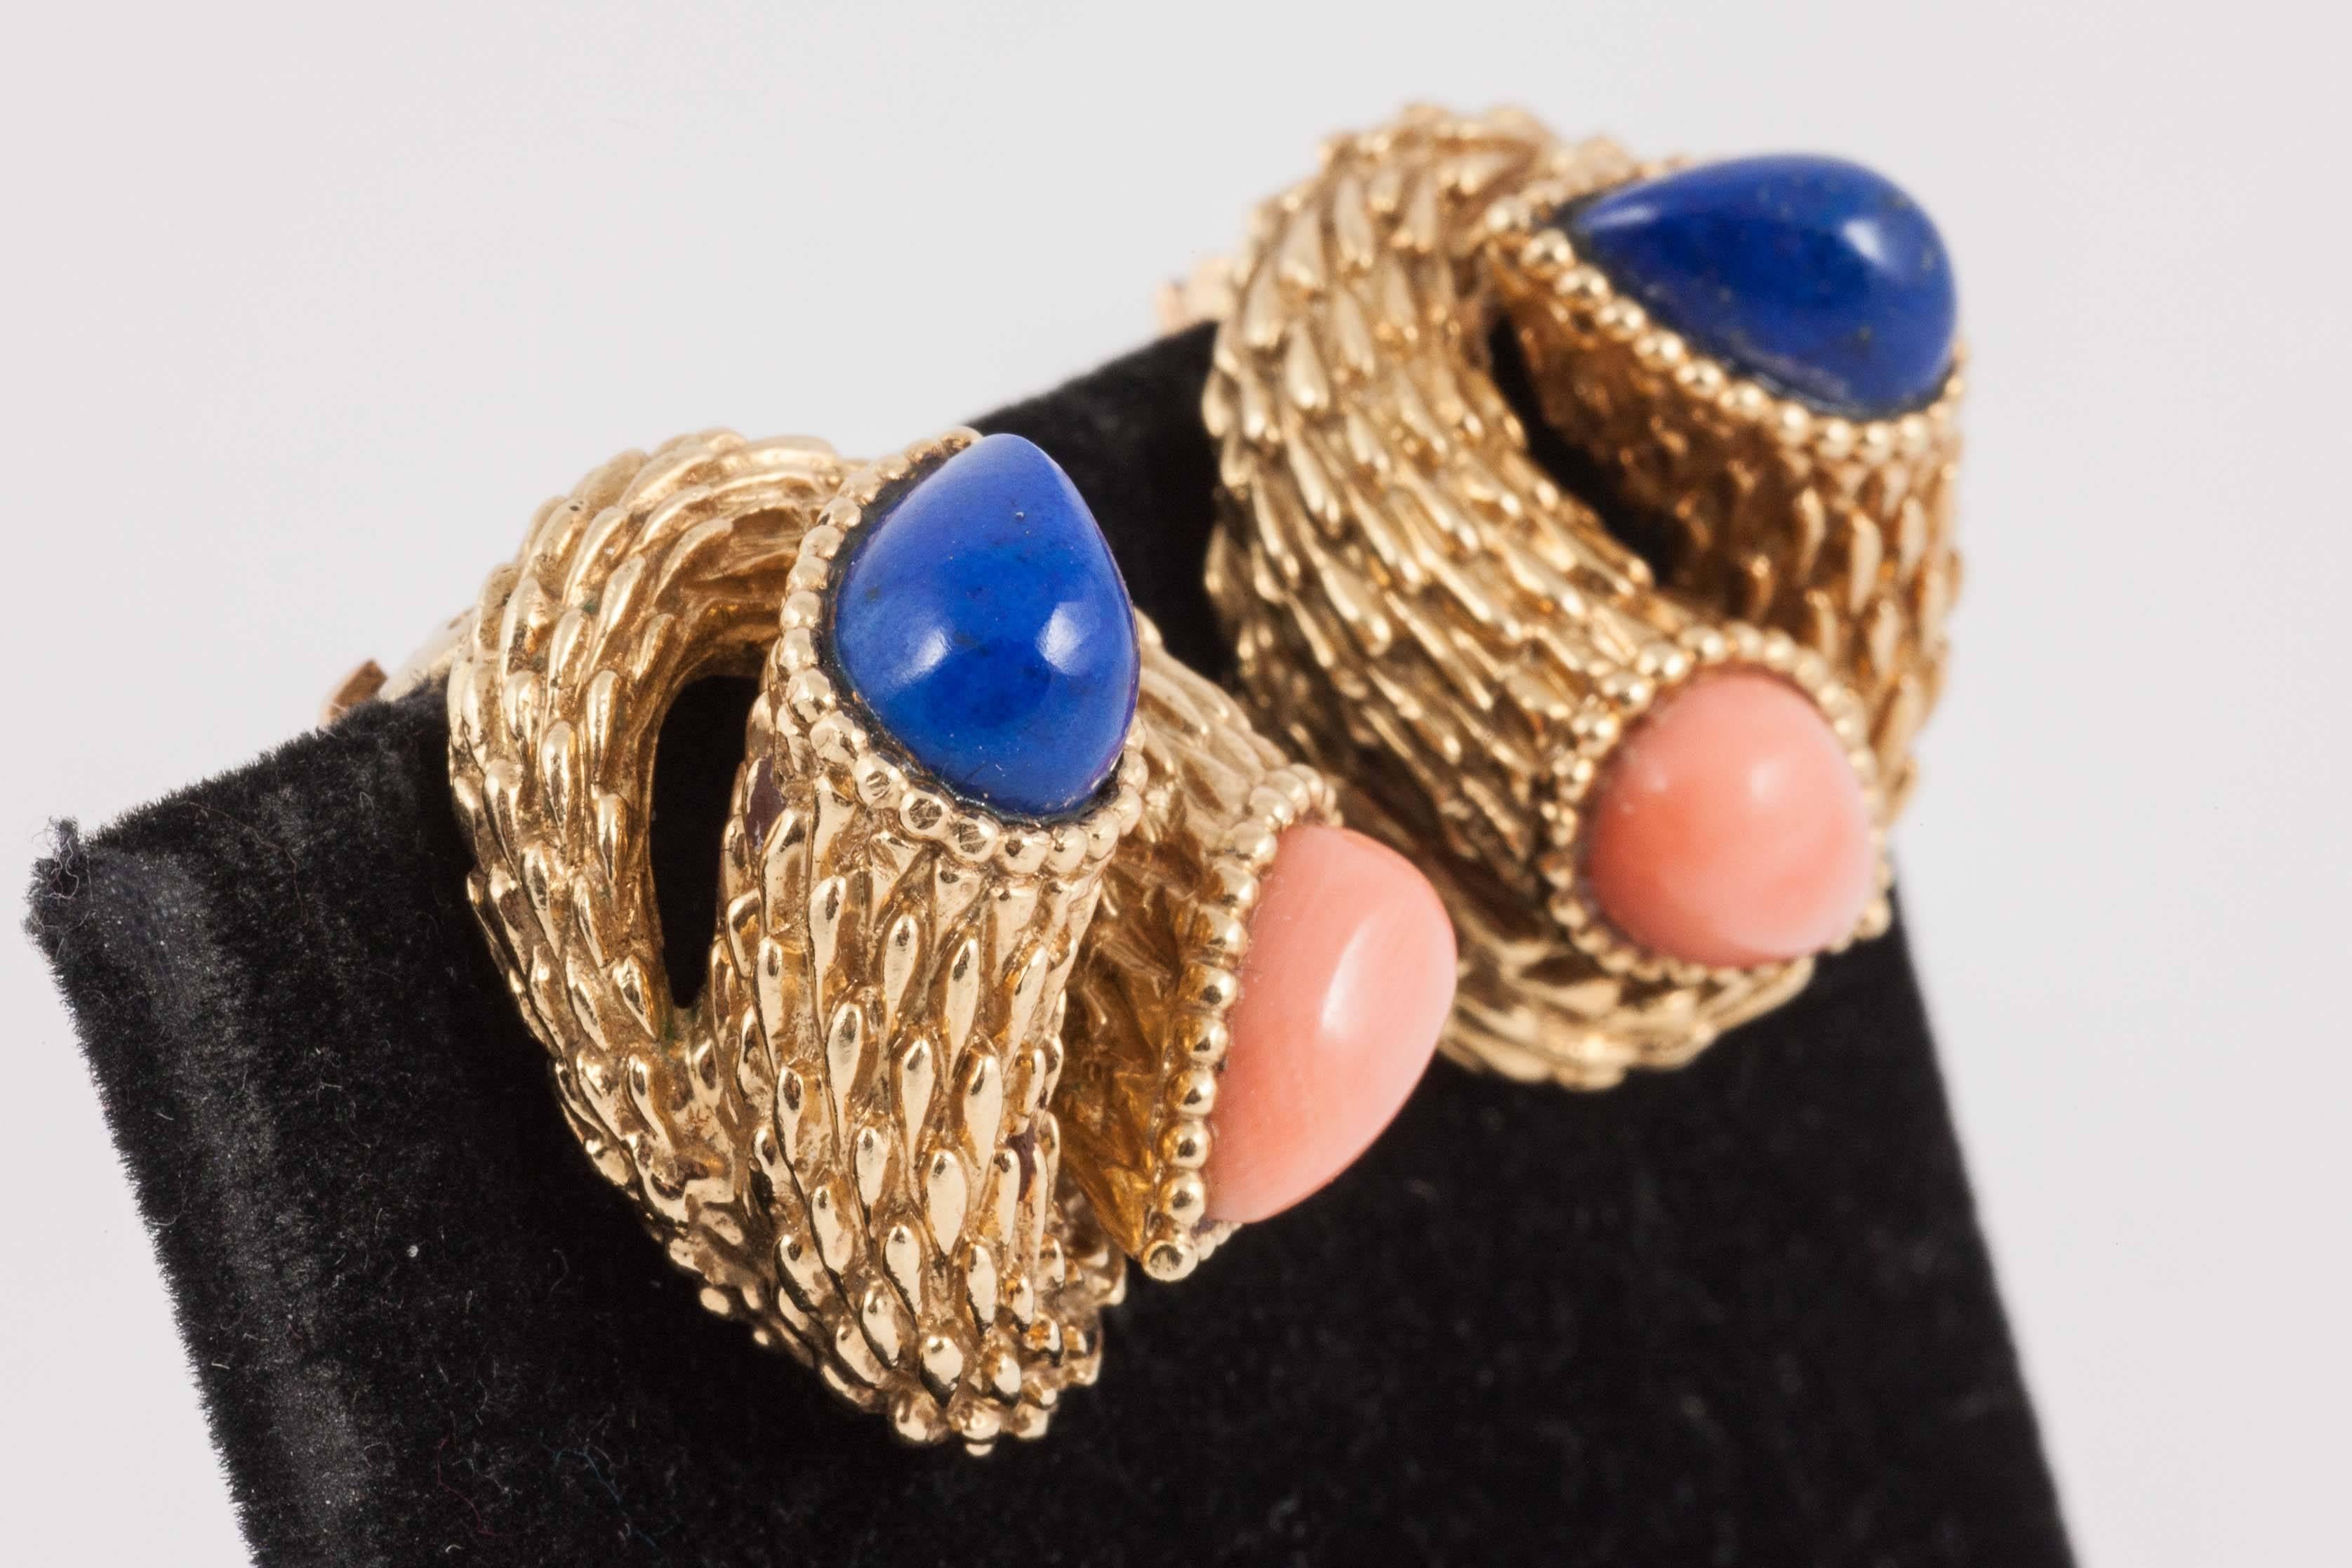 18ct Gold earrings set with Coral and Lapis Lazuli by Boucheron